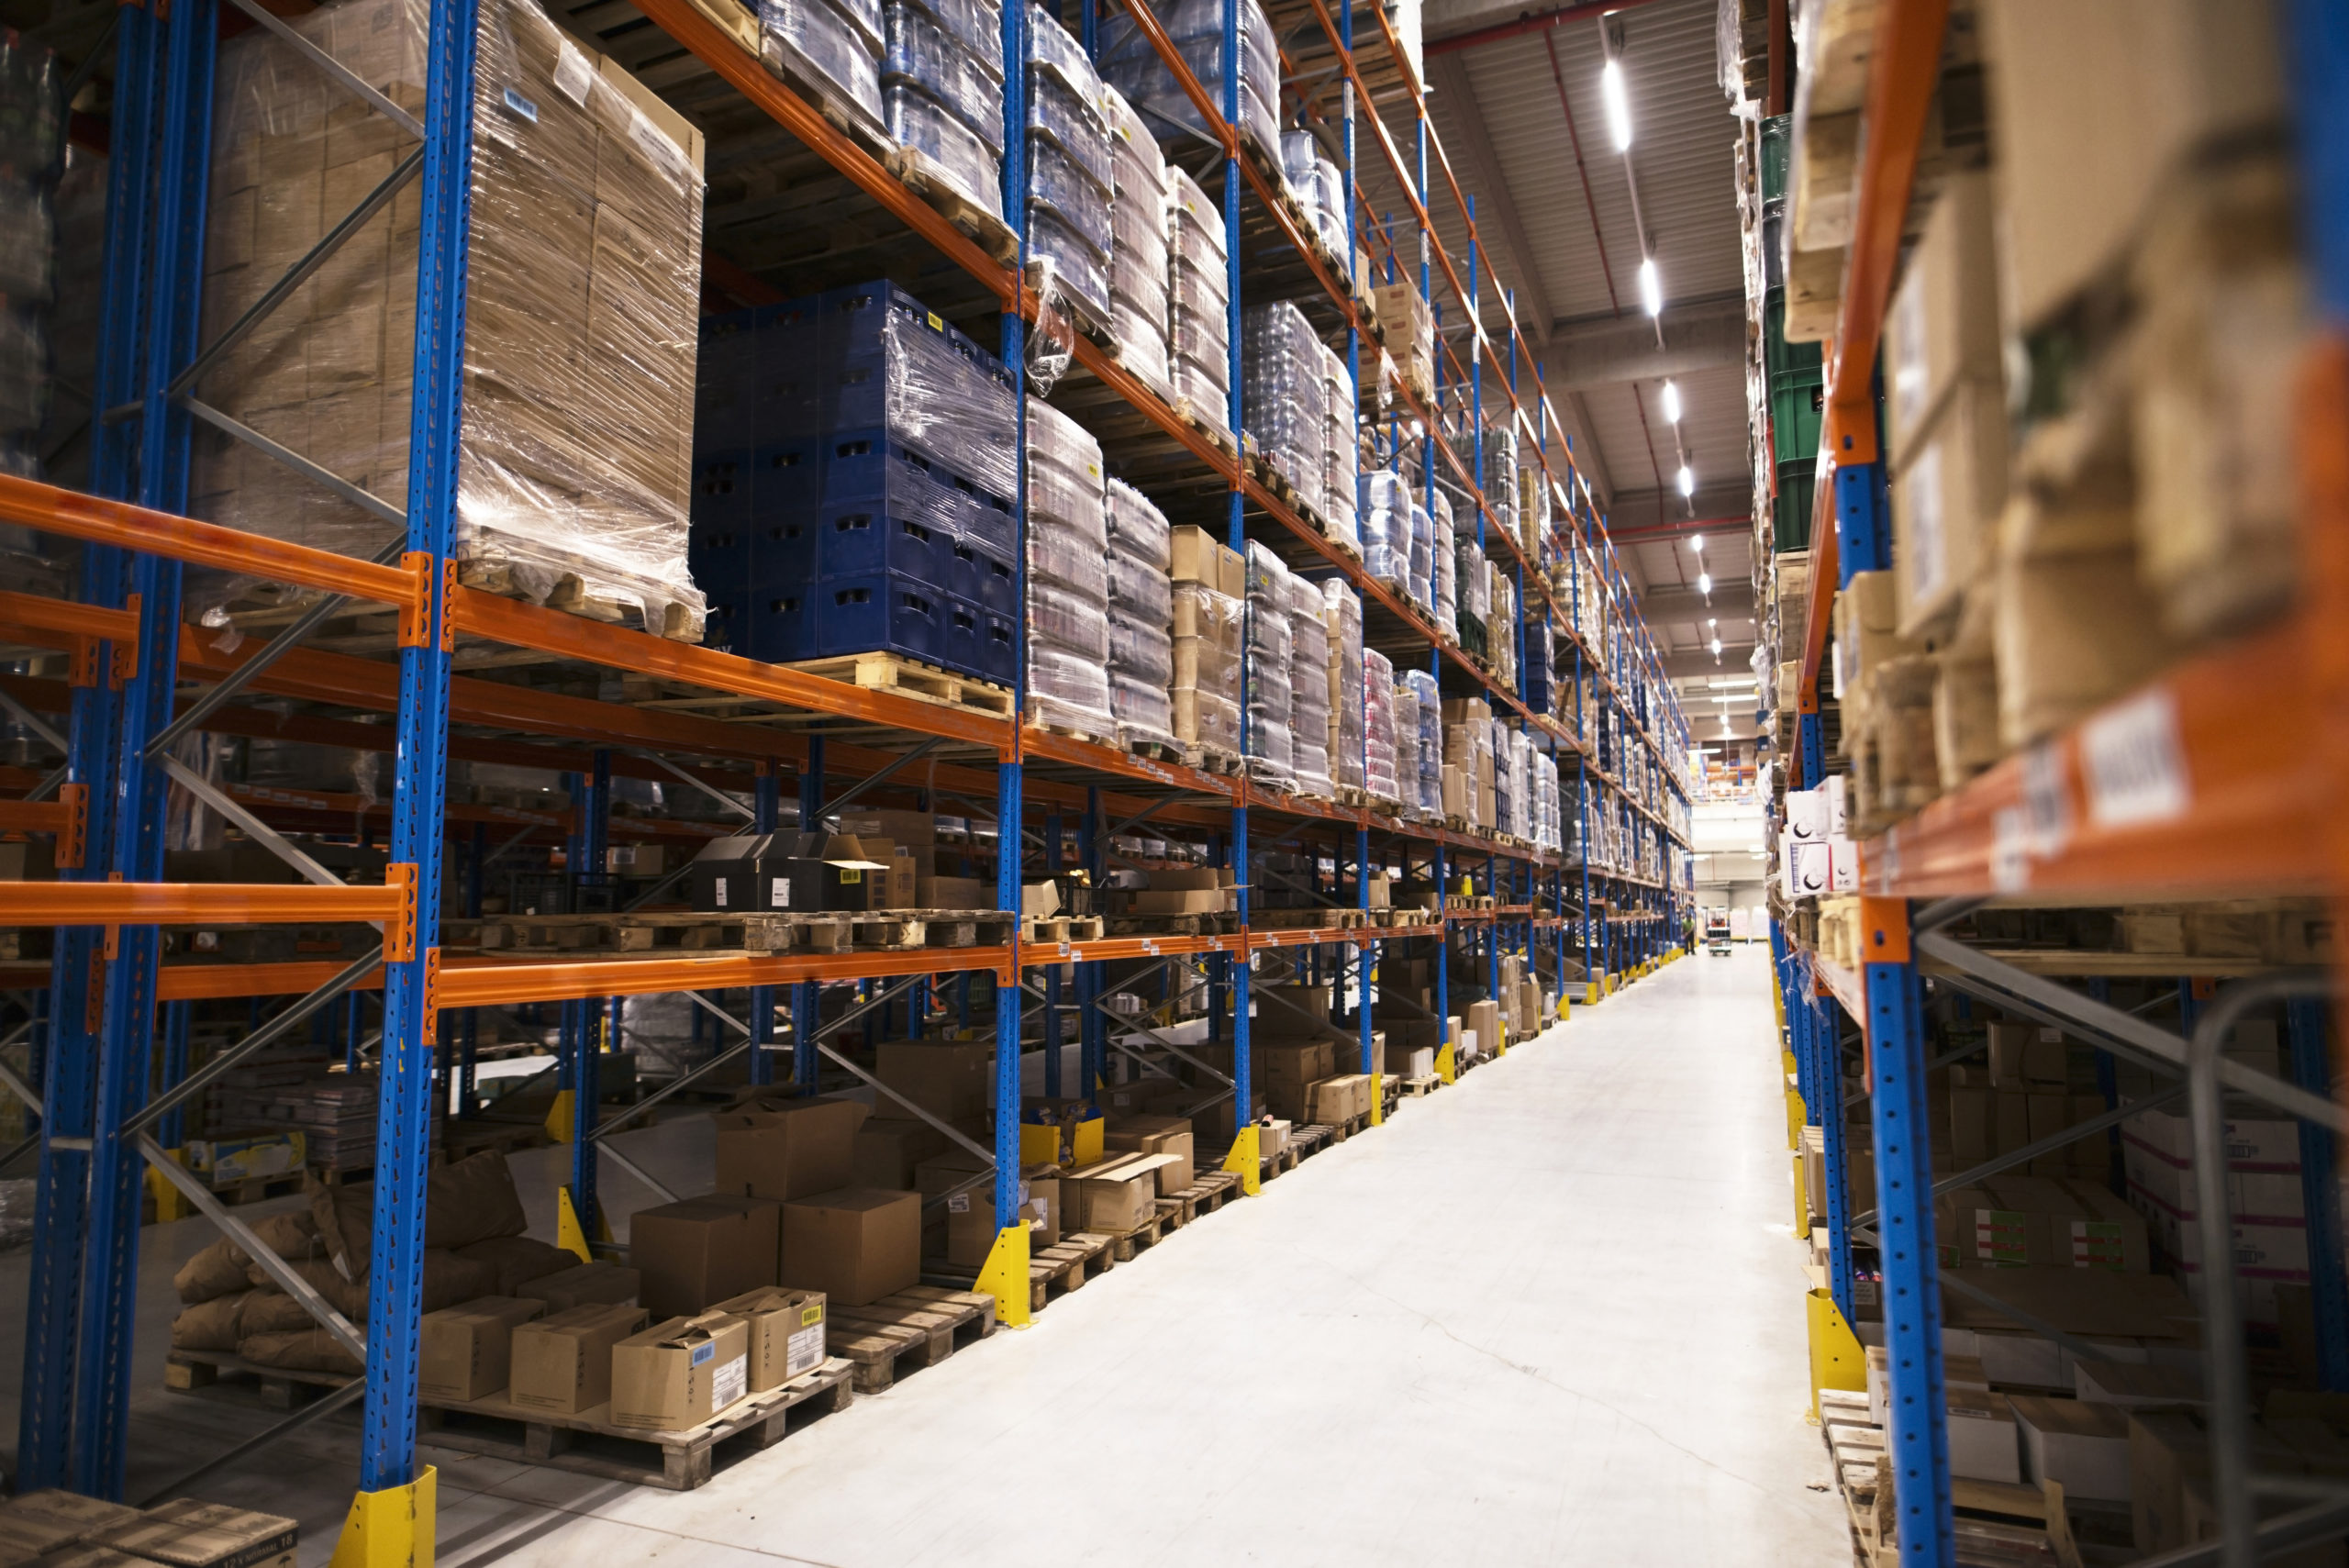 interior-of-large-distribution-warehouse-with-shelves-stacked-with-palettes-and-goods-ready-for-the-market